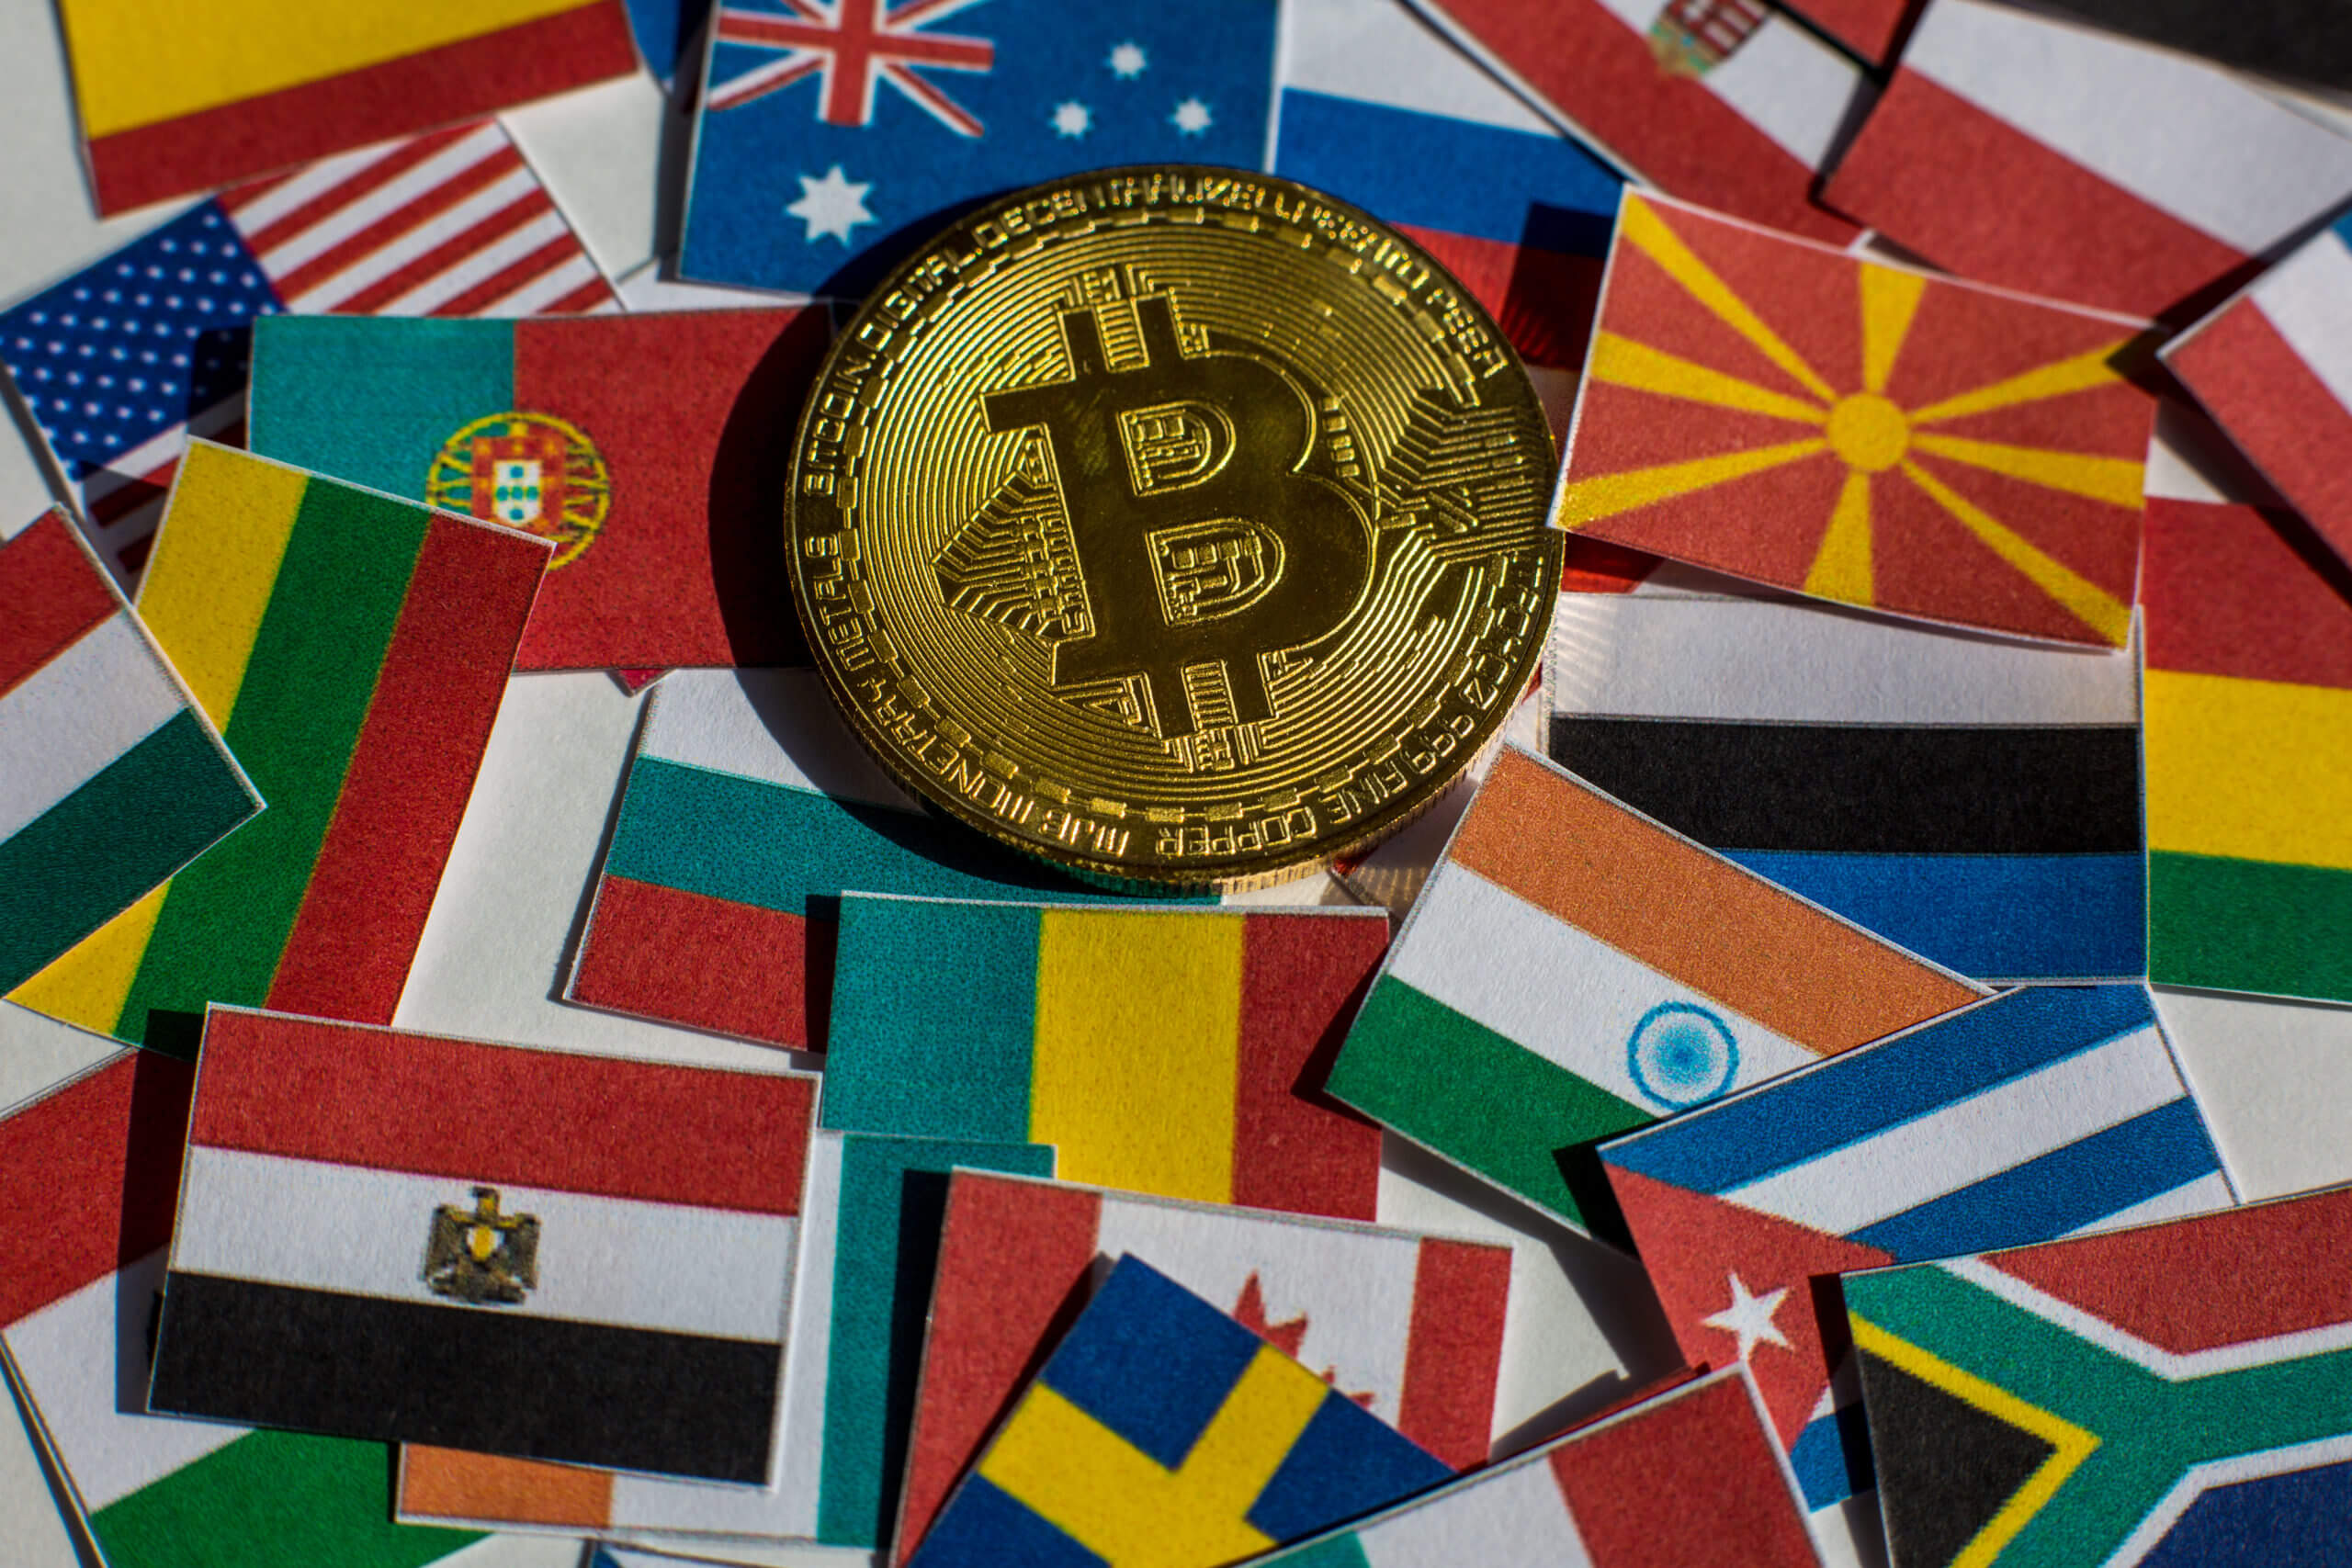 Bitcoin coin surrounded by flags from different countries